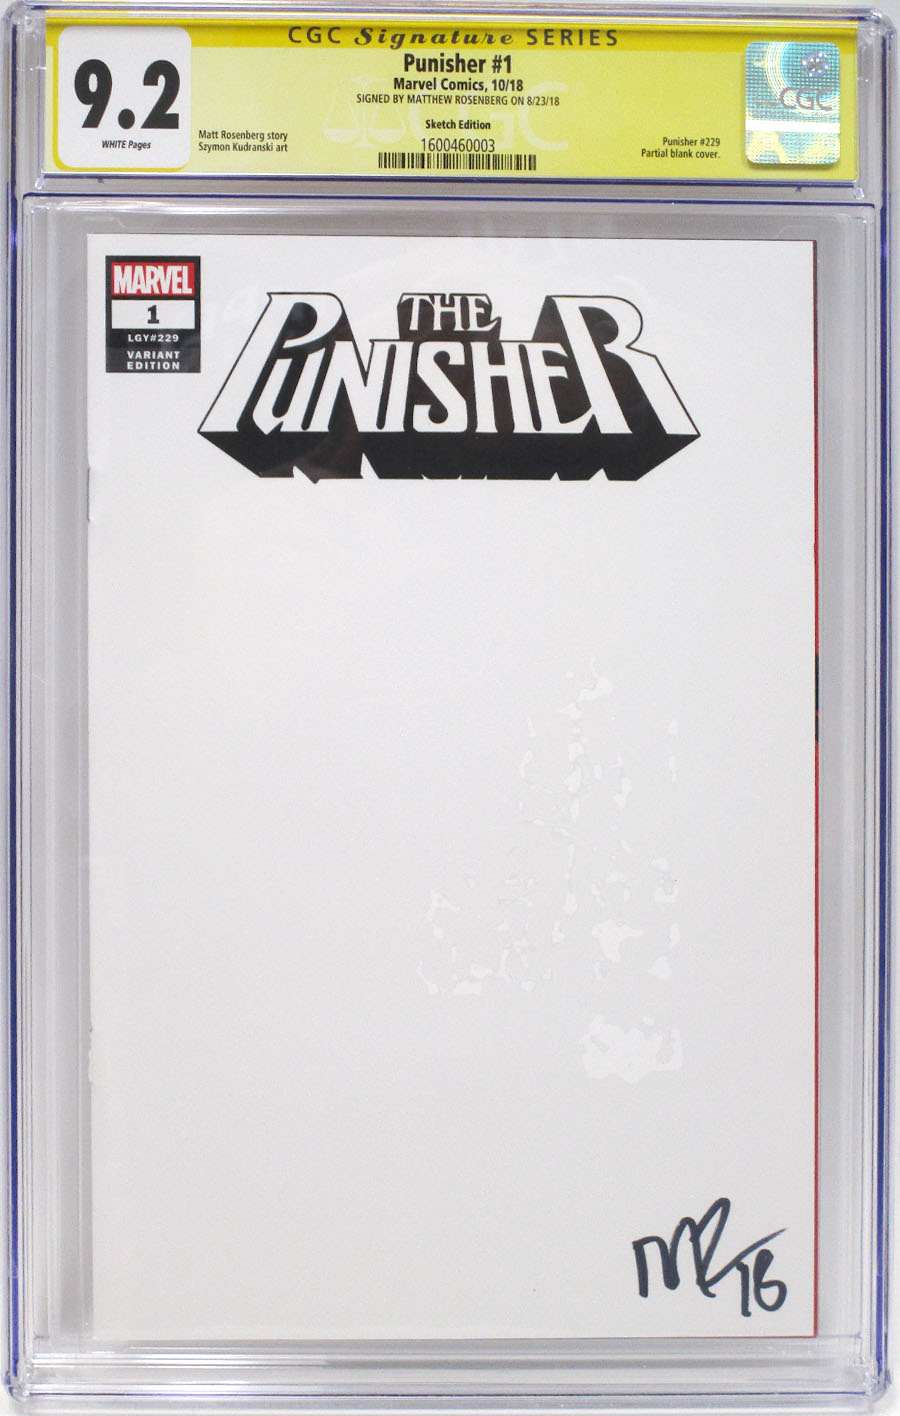 Punisher Vol 11 #1 Cover N Variant Blank Cover CGC Signature Series 9.2 Signed By Matthew Rosenberg